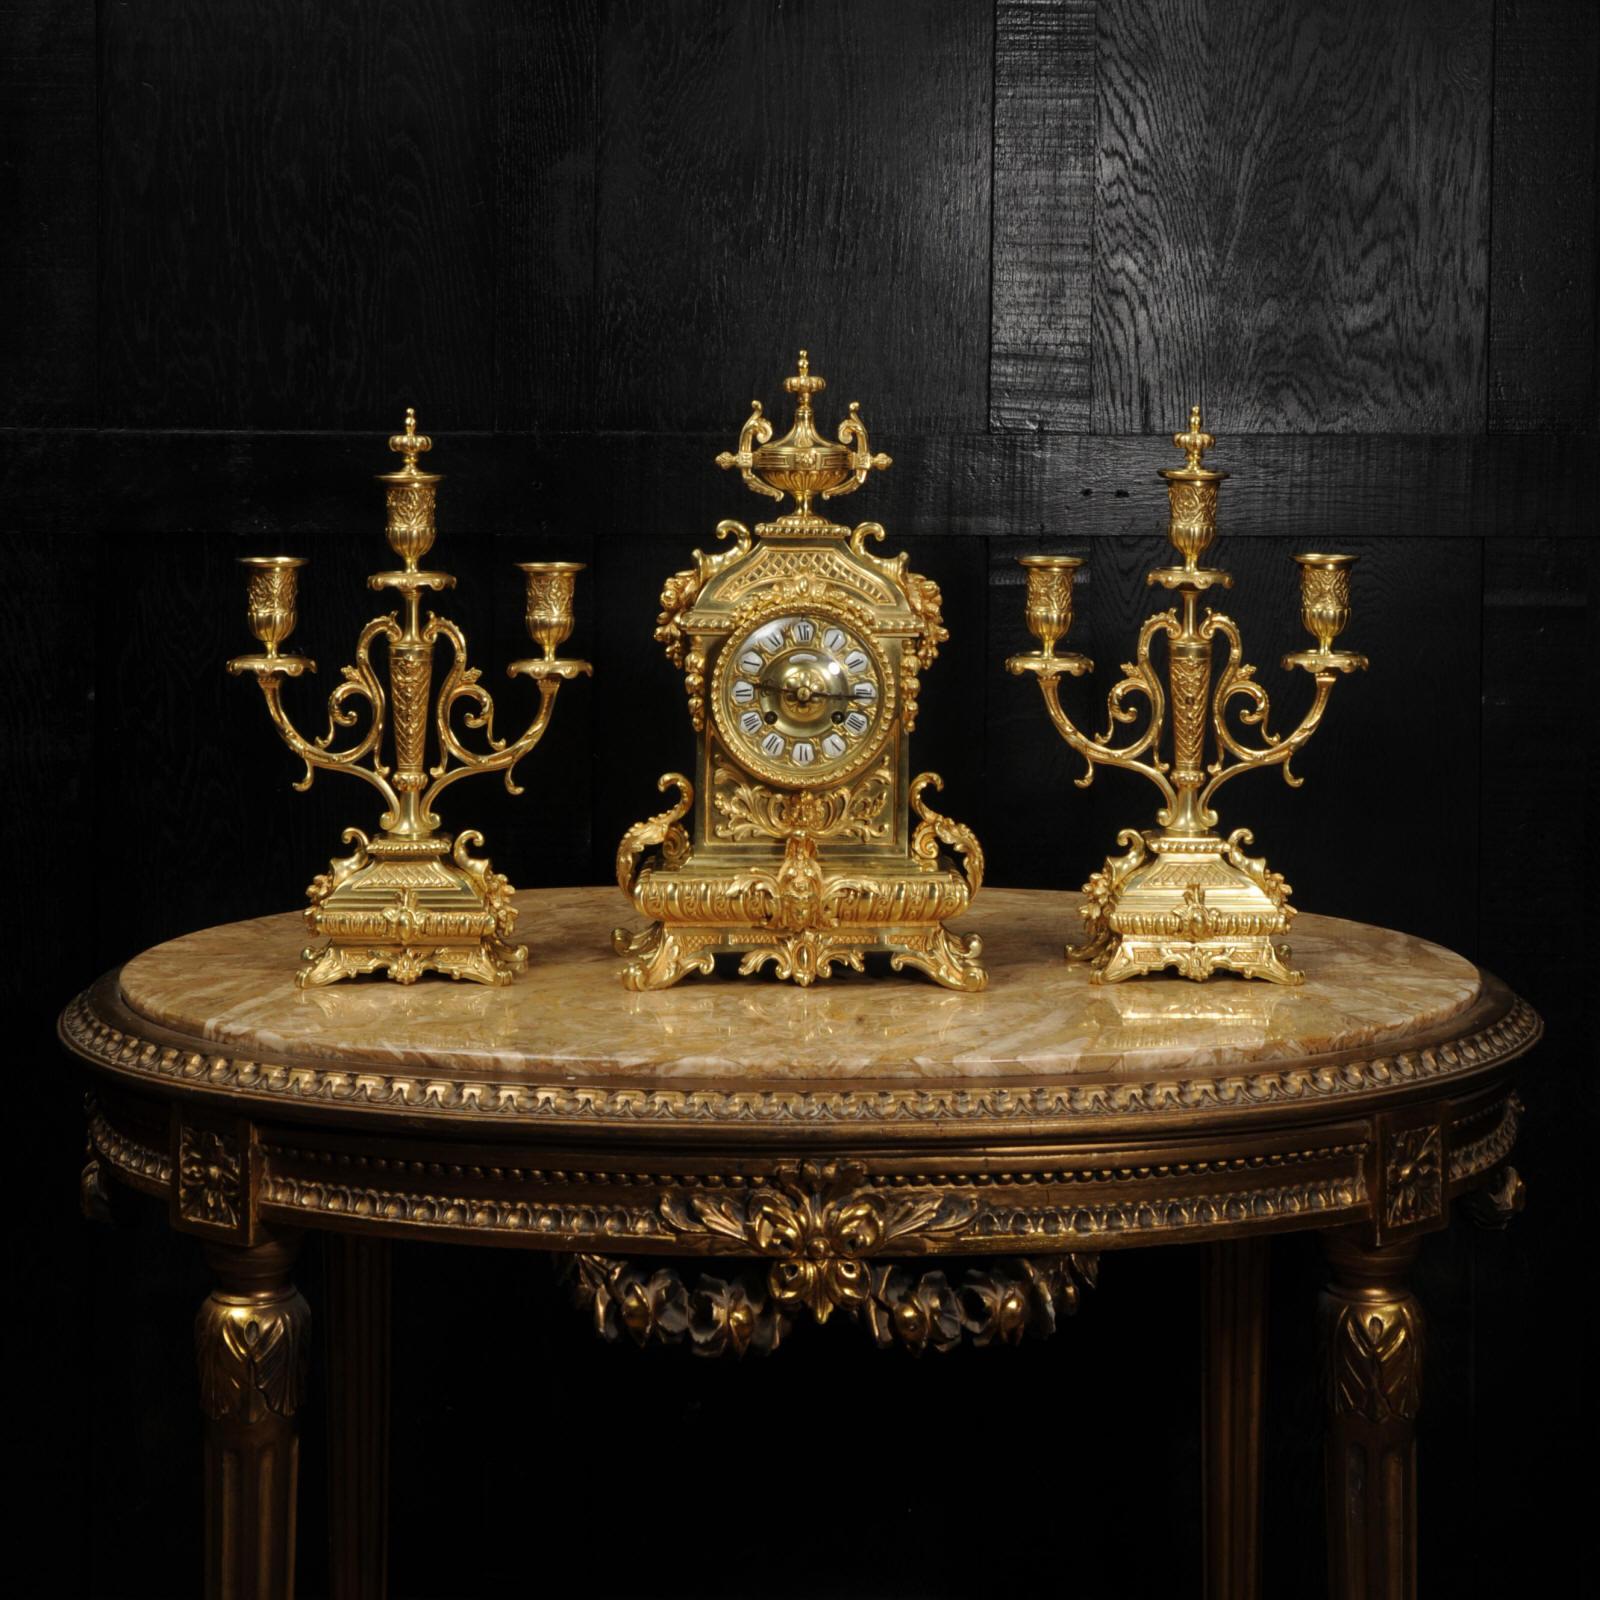 A most beautiful antique French gilt bronze clock set by Japy Frères dating from circa 1880. It is Baroque in style, the gilt bronze dial with blind fretted panel of acanthus below, a bell shaped top with cornucopia above along with an urn. The